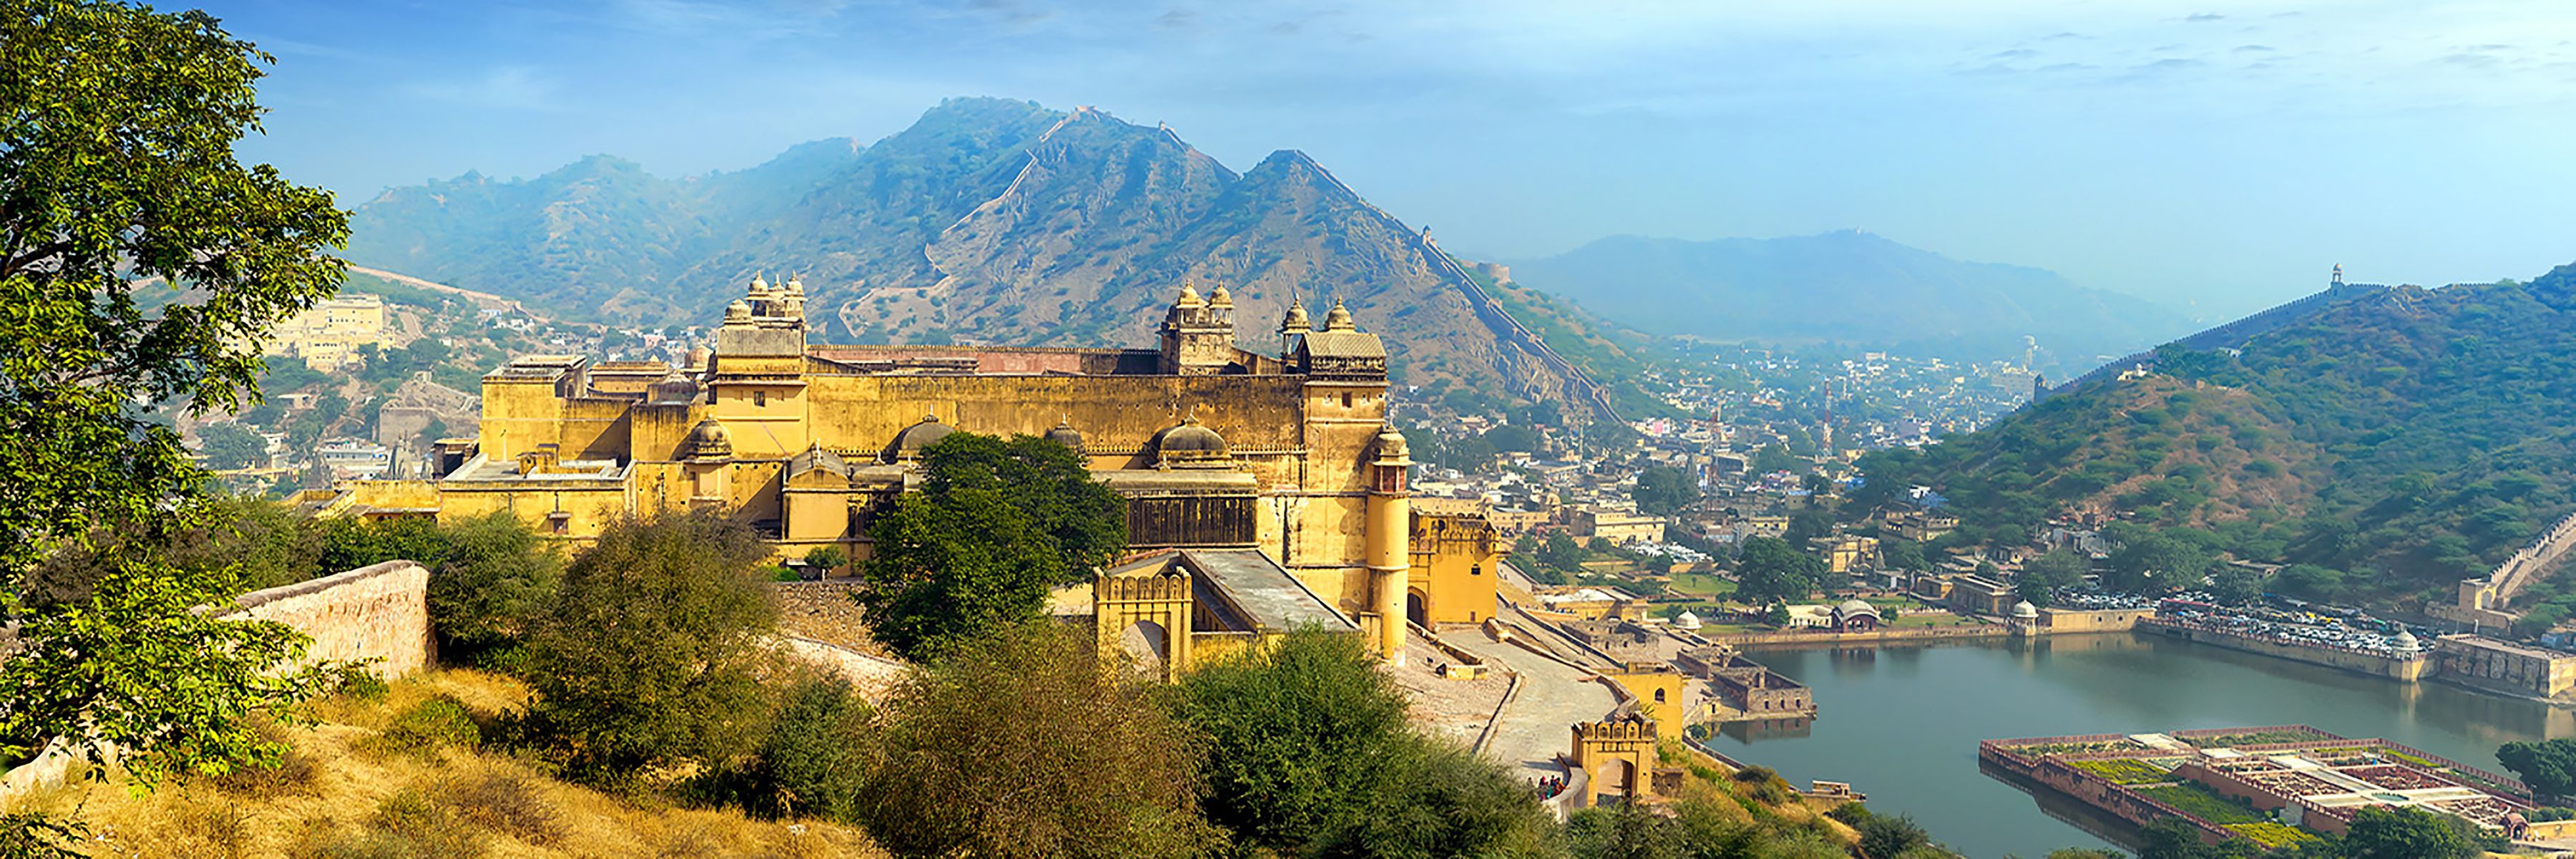 Amber Fort in Jaipur, Rachasthan